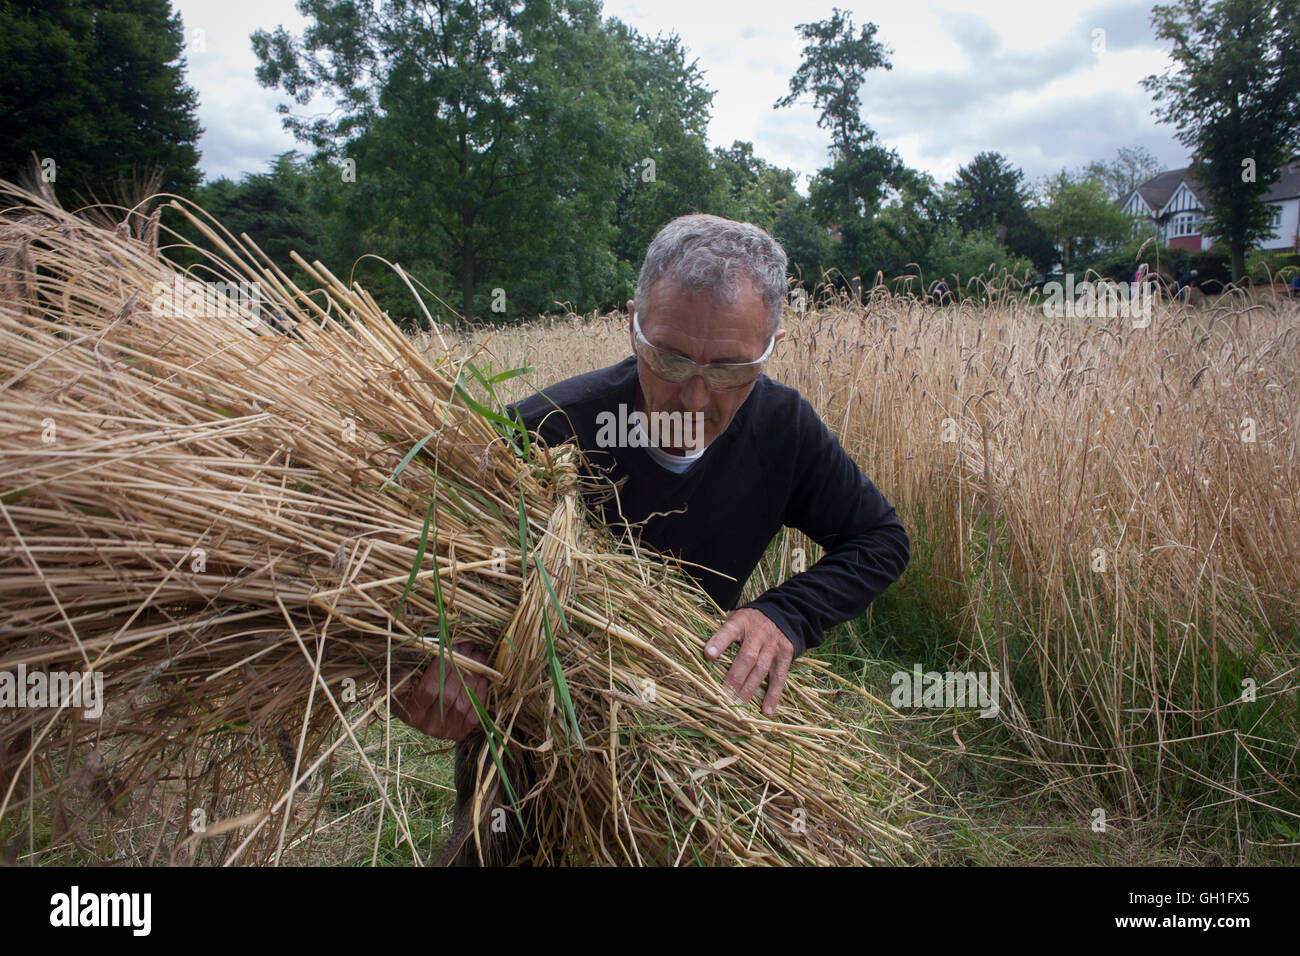 London, UK 8th August 2016: Local community volunteers help harvest the heritage wheat crop from the public Ruskin Park in the south London borough of Lambeth, UK. The wheat has been growing in the park's long grass area, a corner where a variety of wheat such as Blue Cone Rivet, Rouge d'Ecosse and Old kent Red and others including from Ethiopia, have thrived. London heritage wheat specialist and baker Andy Forbes, will have his produce ground in the once-derelict windmill in Brixton, which, after Lottery funding, now serves the community as a working mill. Credit: Richard Baker / Alamy Live N Stock Photo